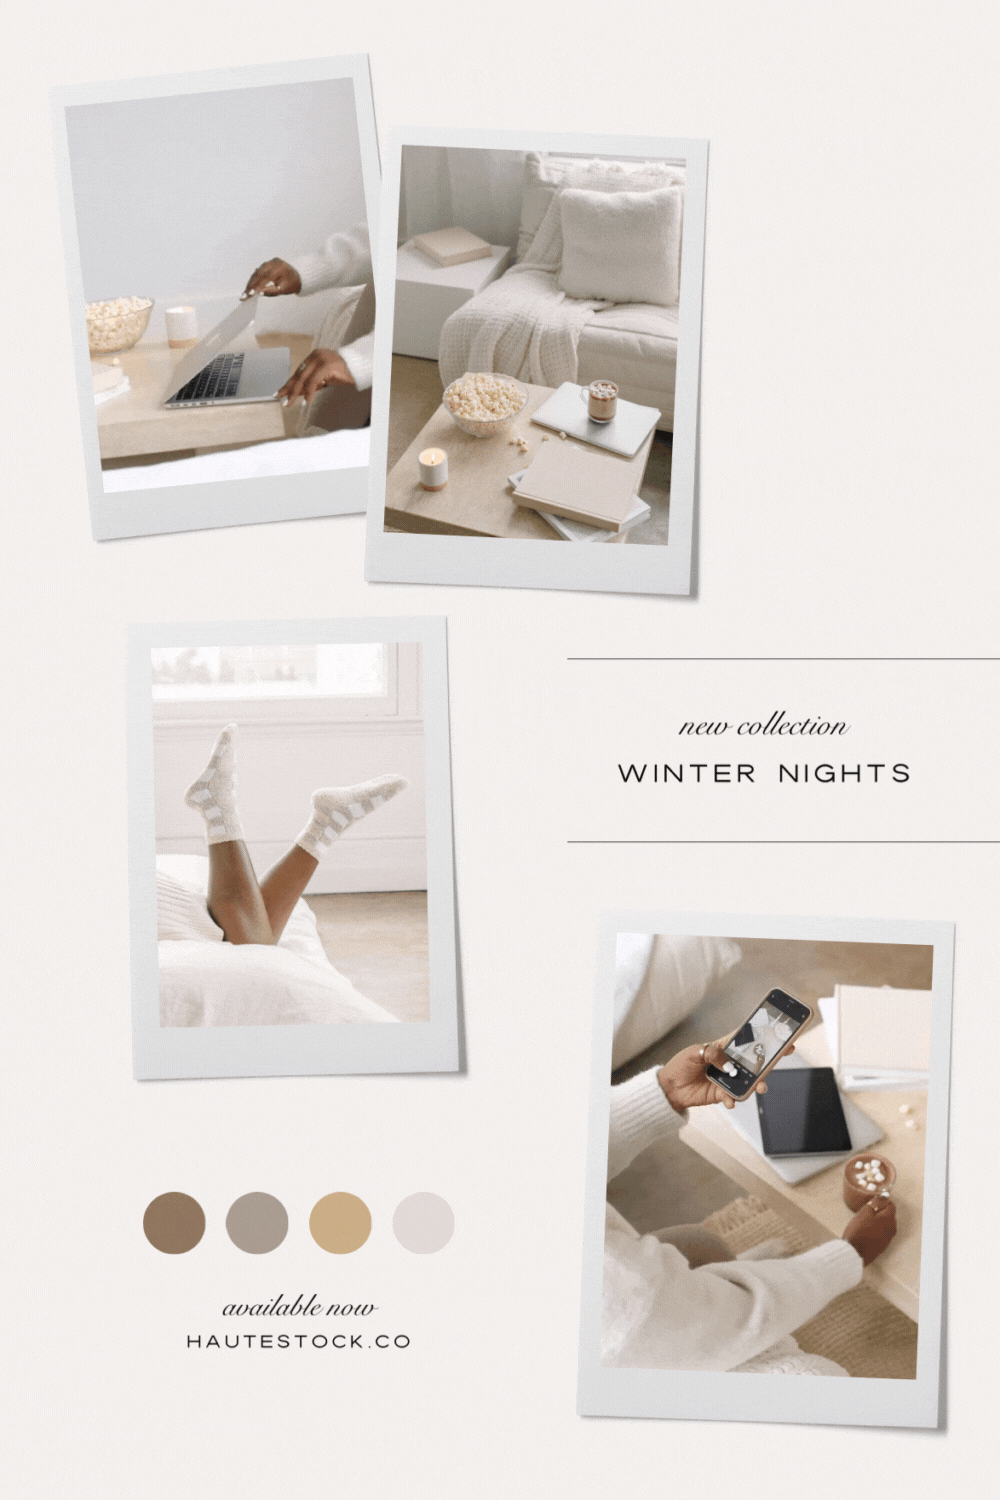 Moodboard for Winter Nights, a cozy winter themed workspace stock photos & videos collection in neutral color palette.